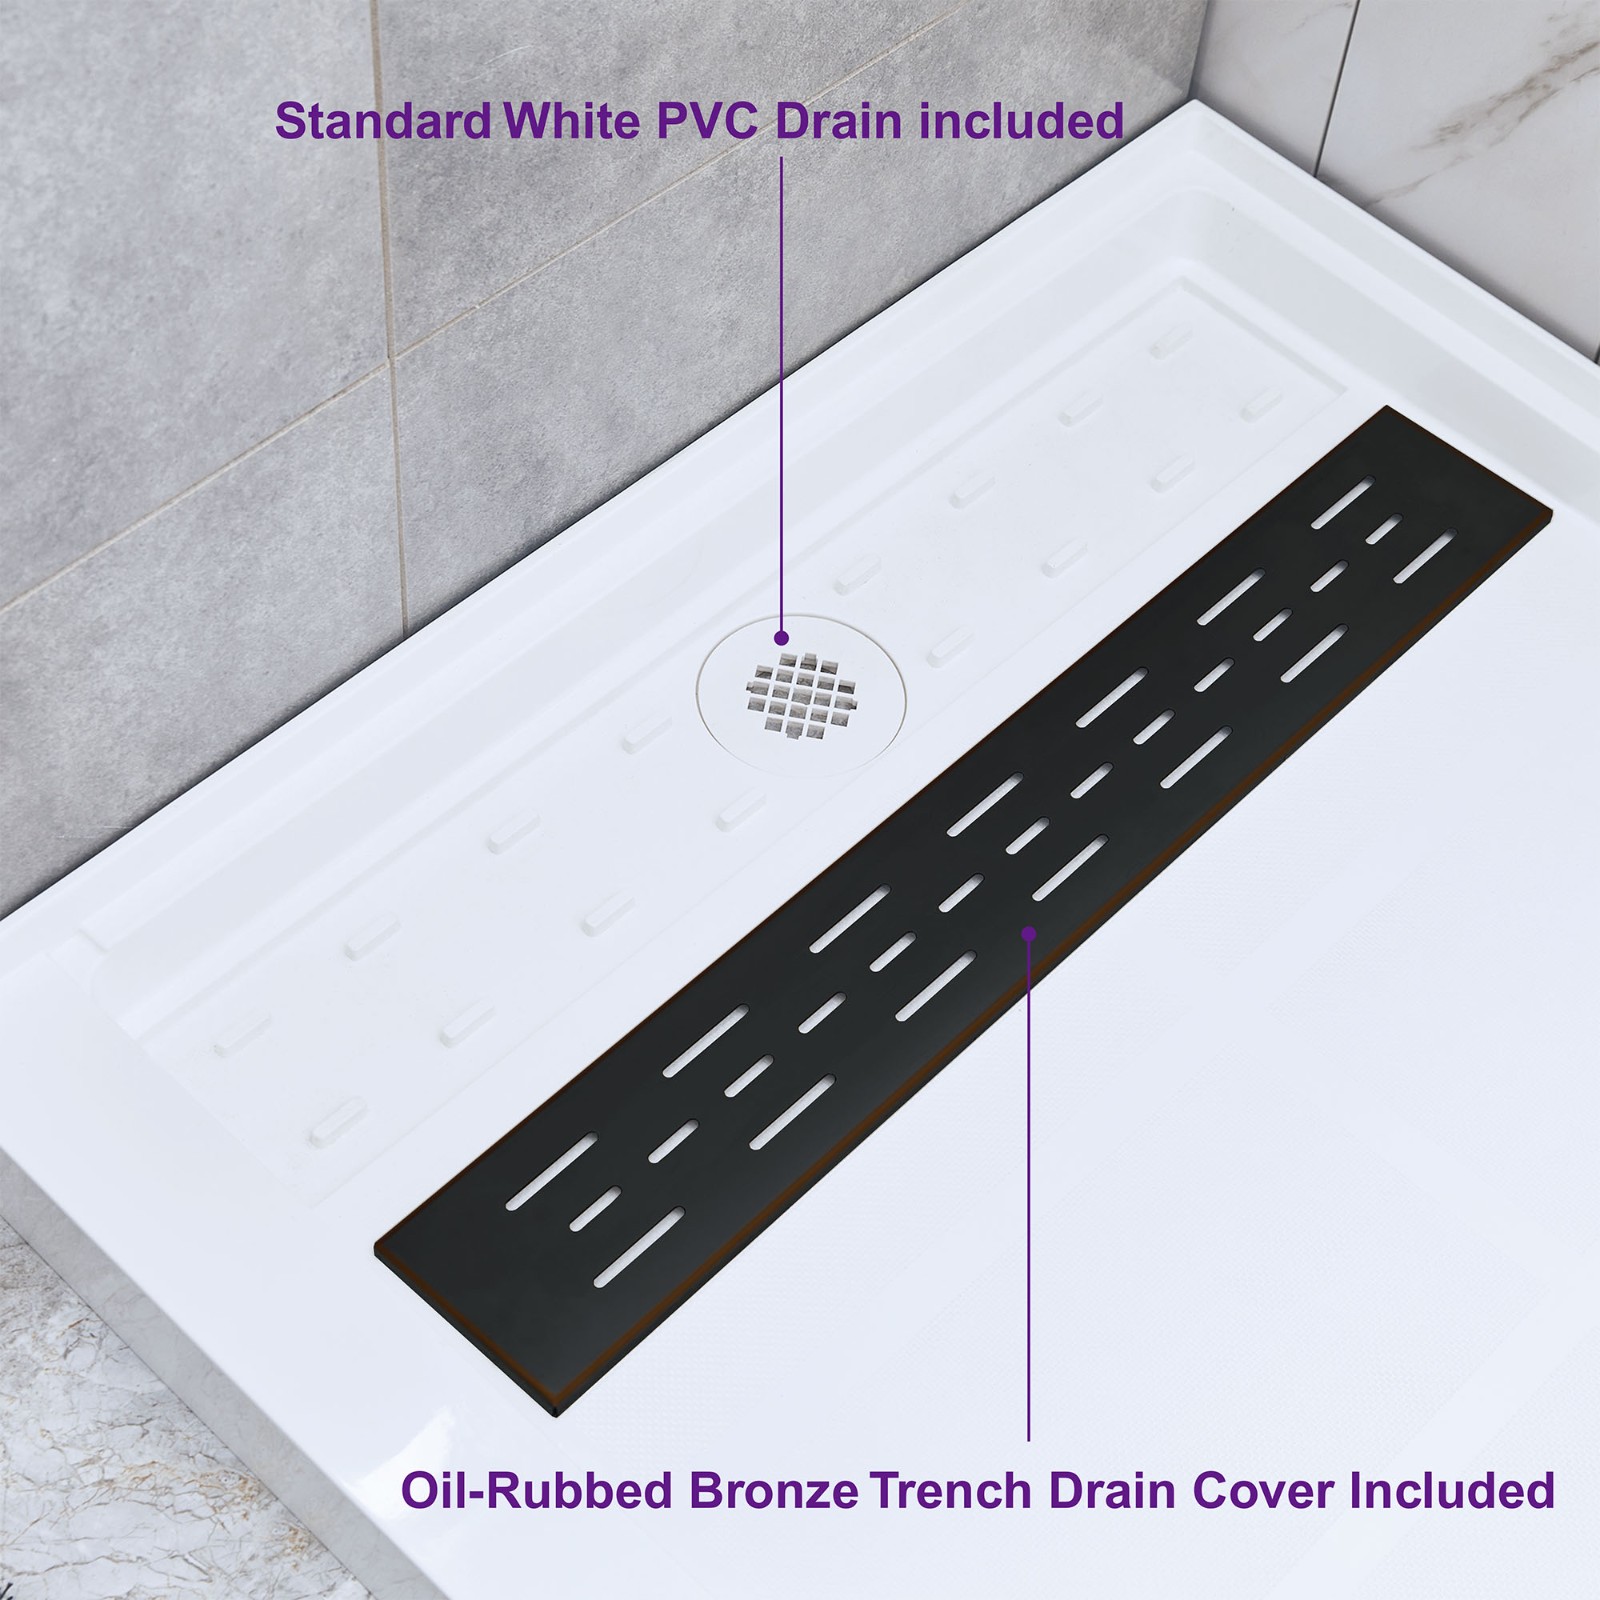  WOODBRIDGE SBR6036-1000R-ORB SolidSurface Shower Base with Recessed Trench Side Including Oil Rubbed Bronze Linear Cover, 60